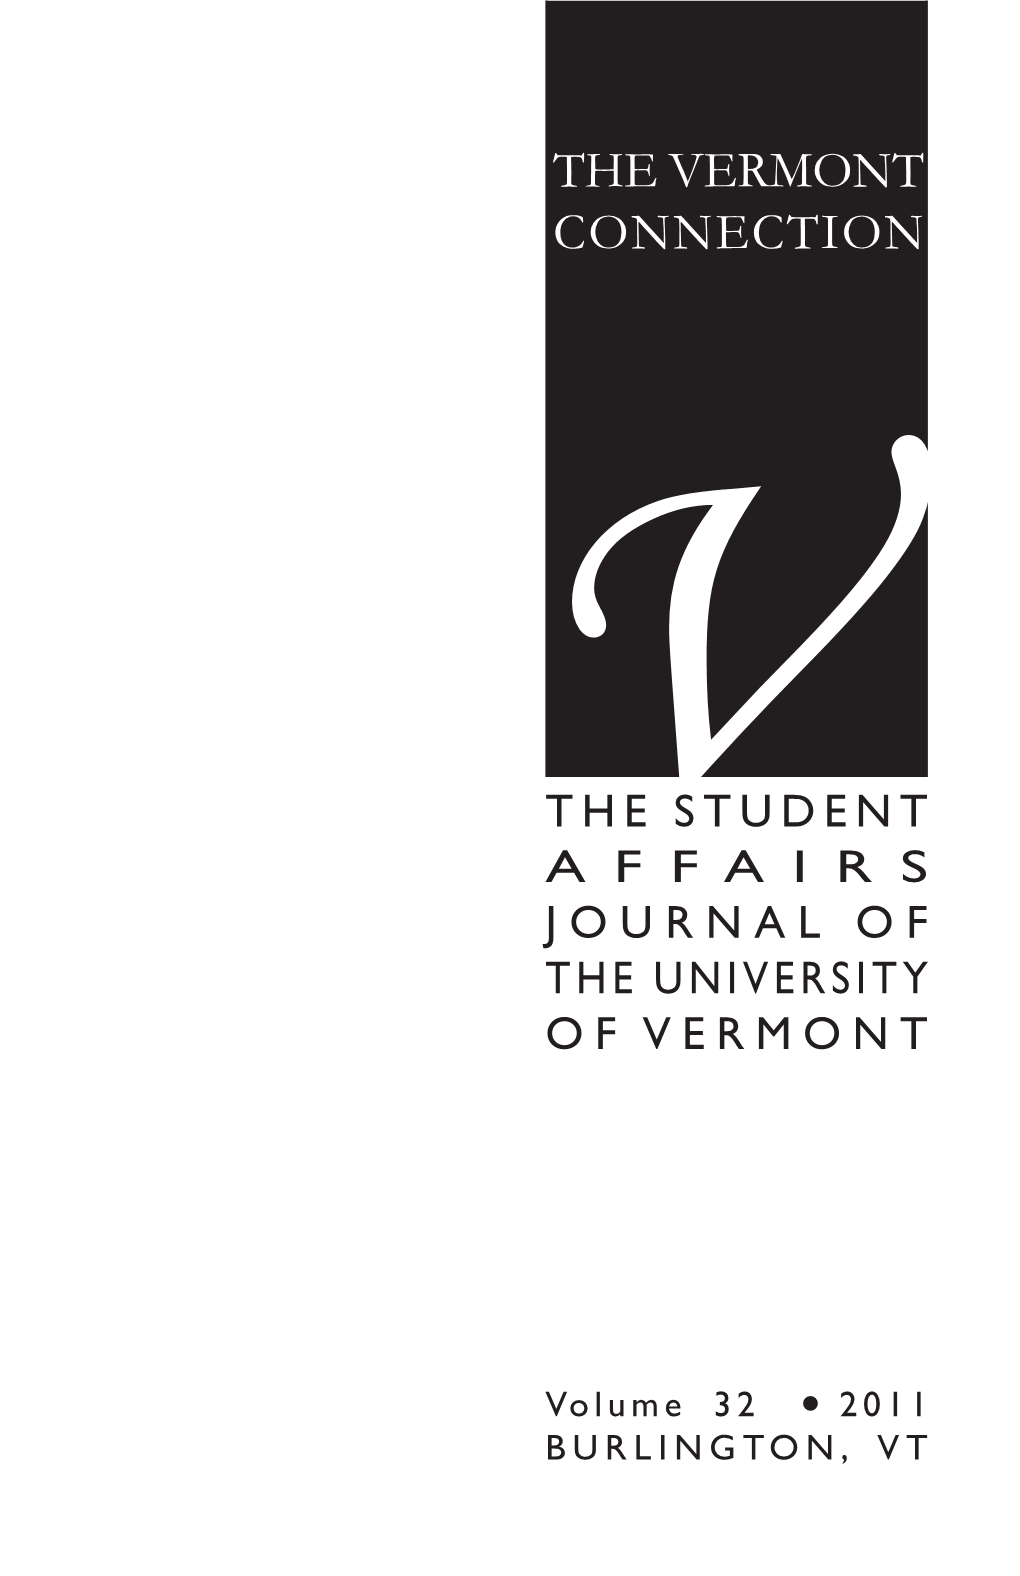 The Vermont Connection